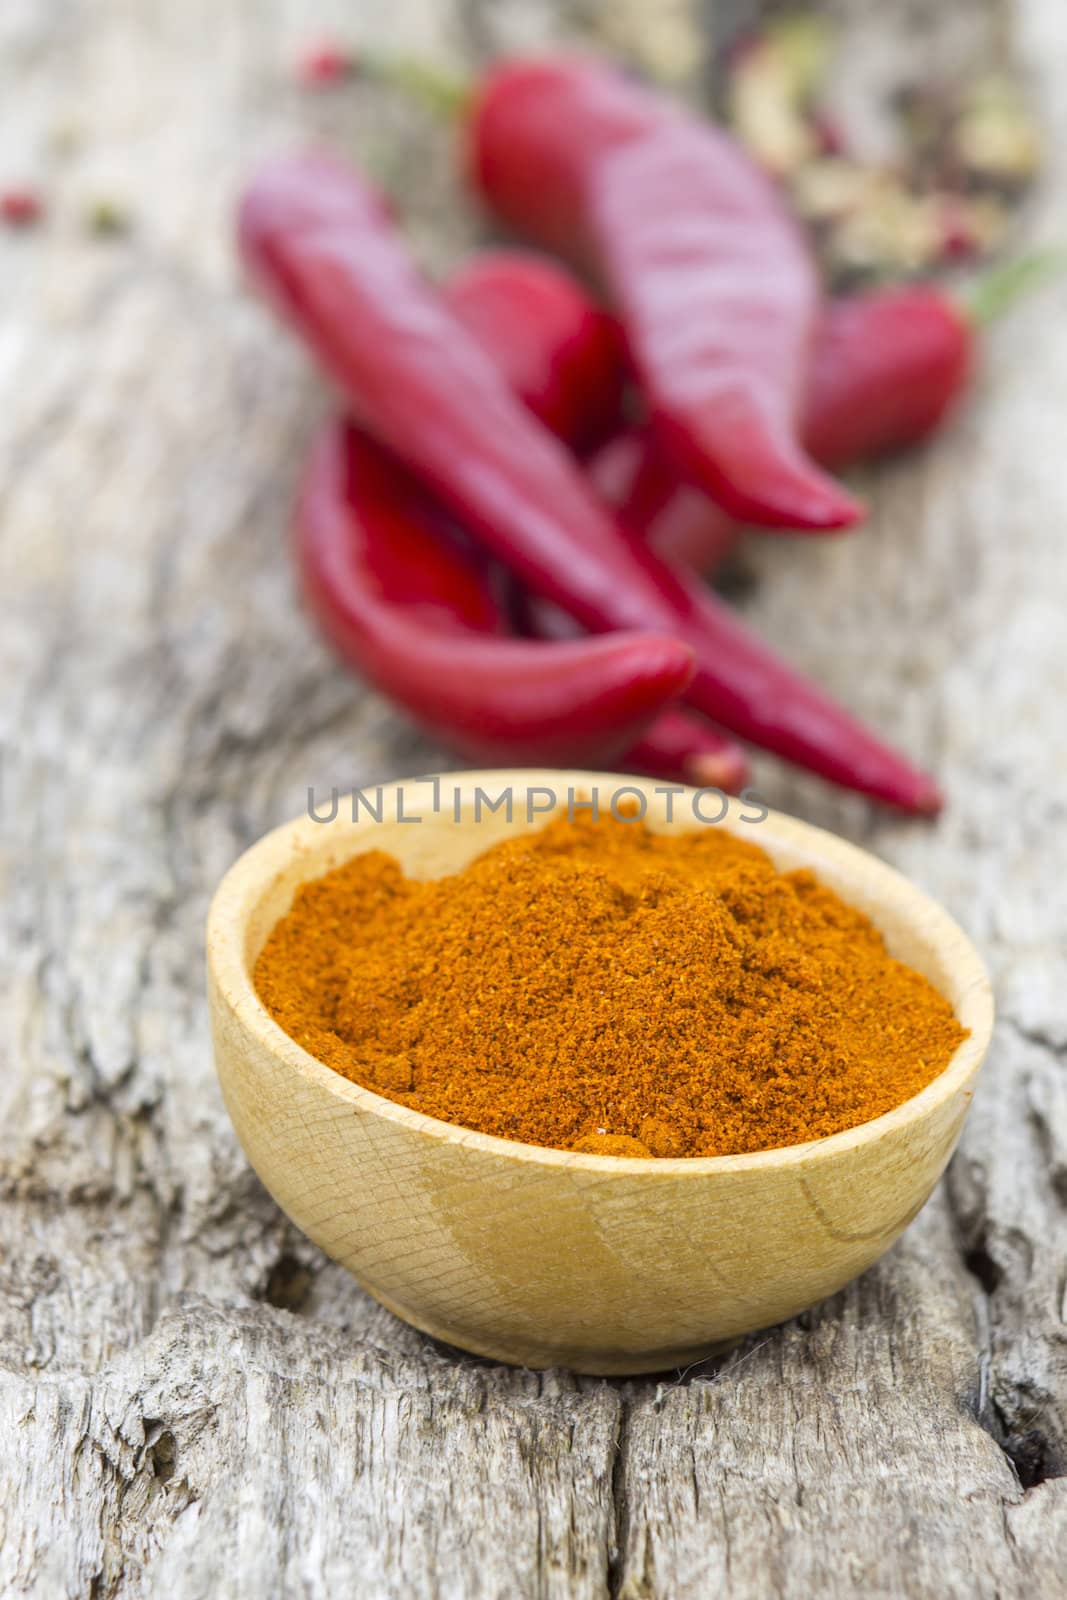 red chili powder with red chilies by miradrozdowski